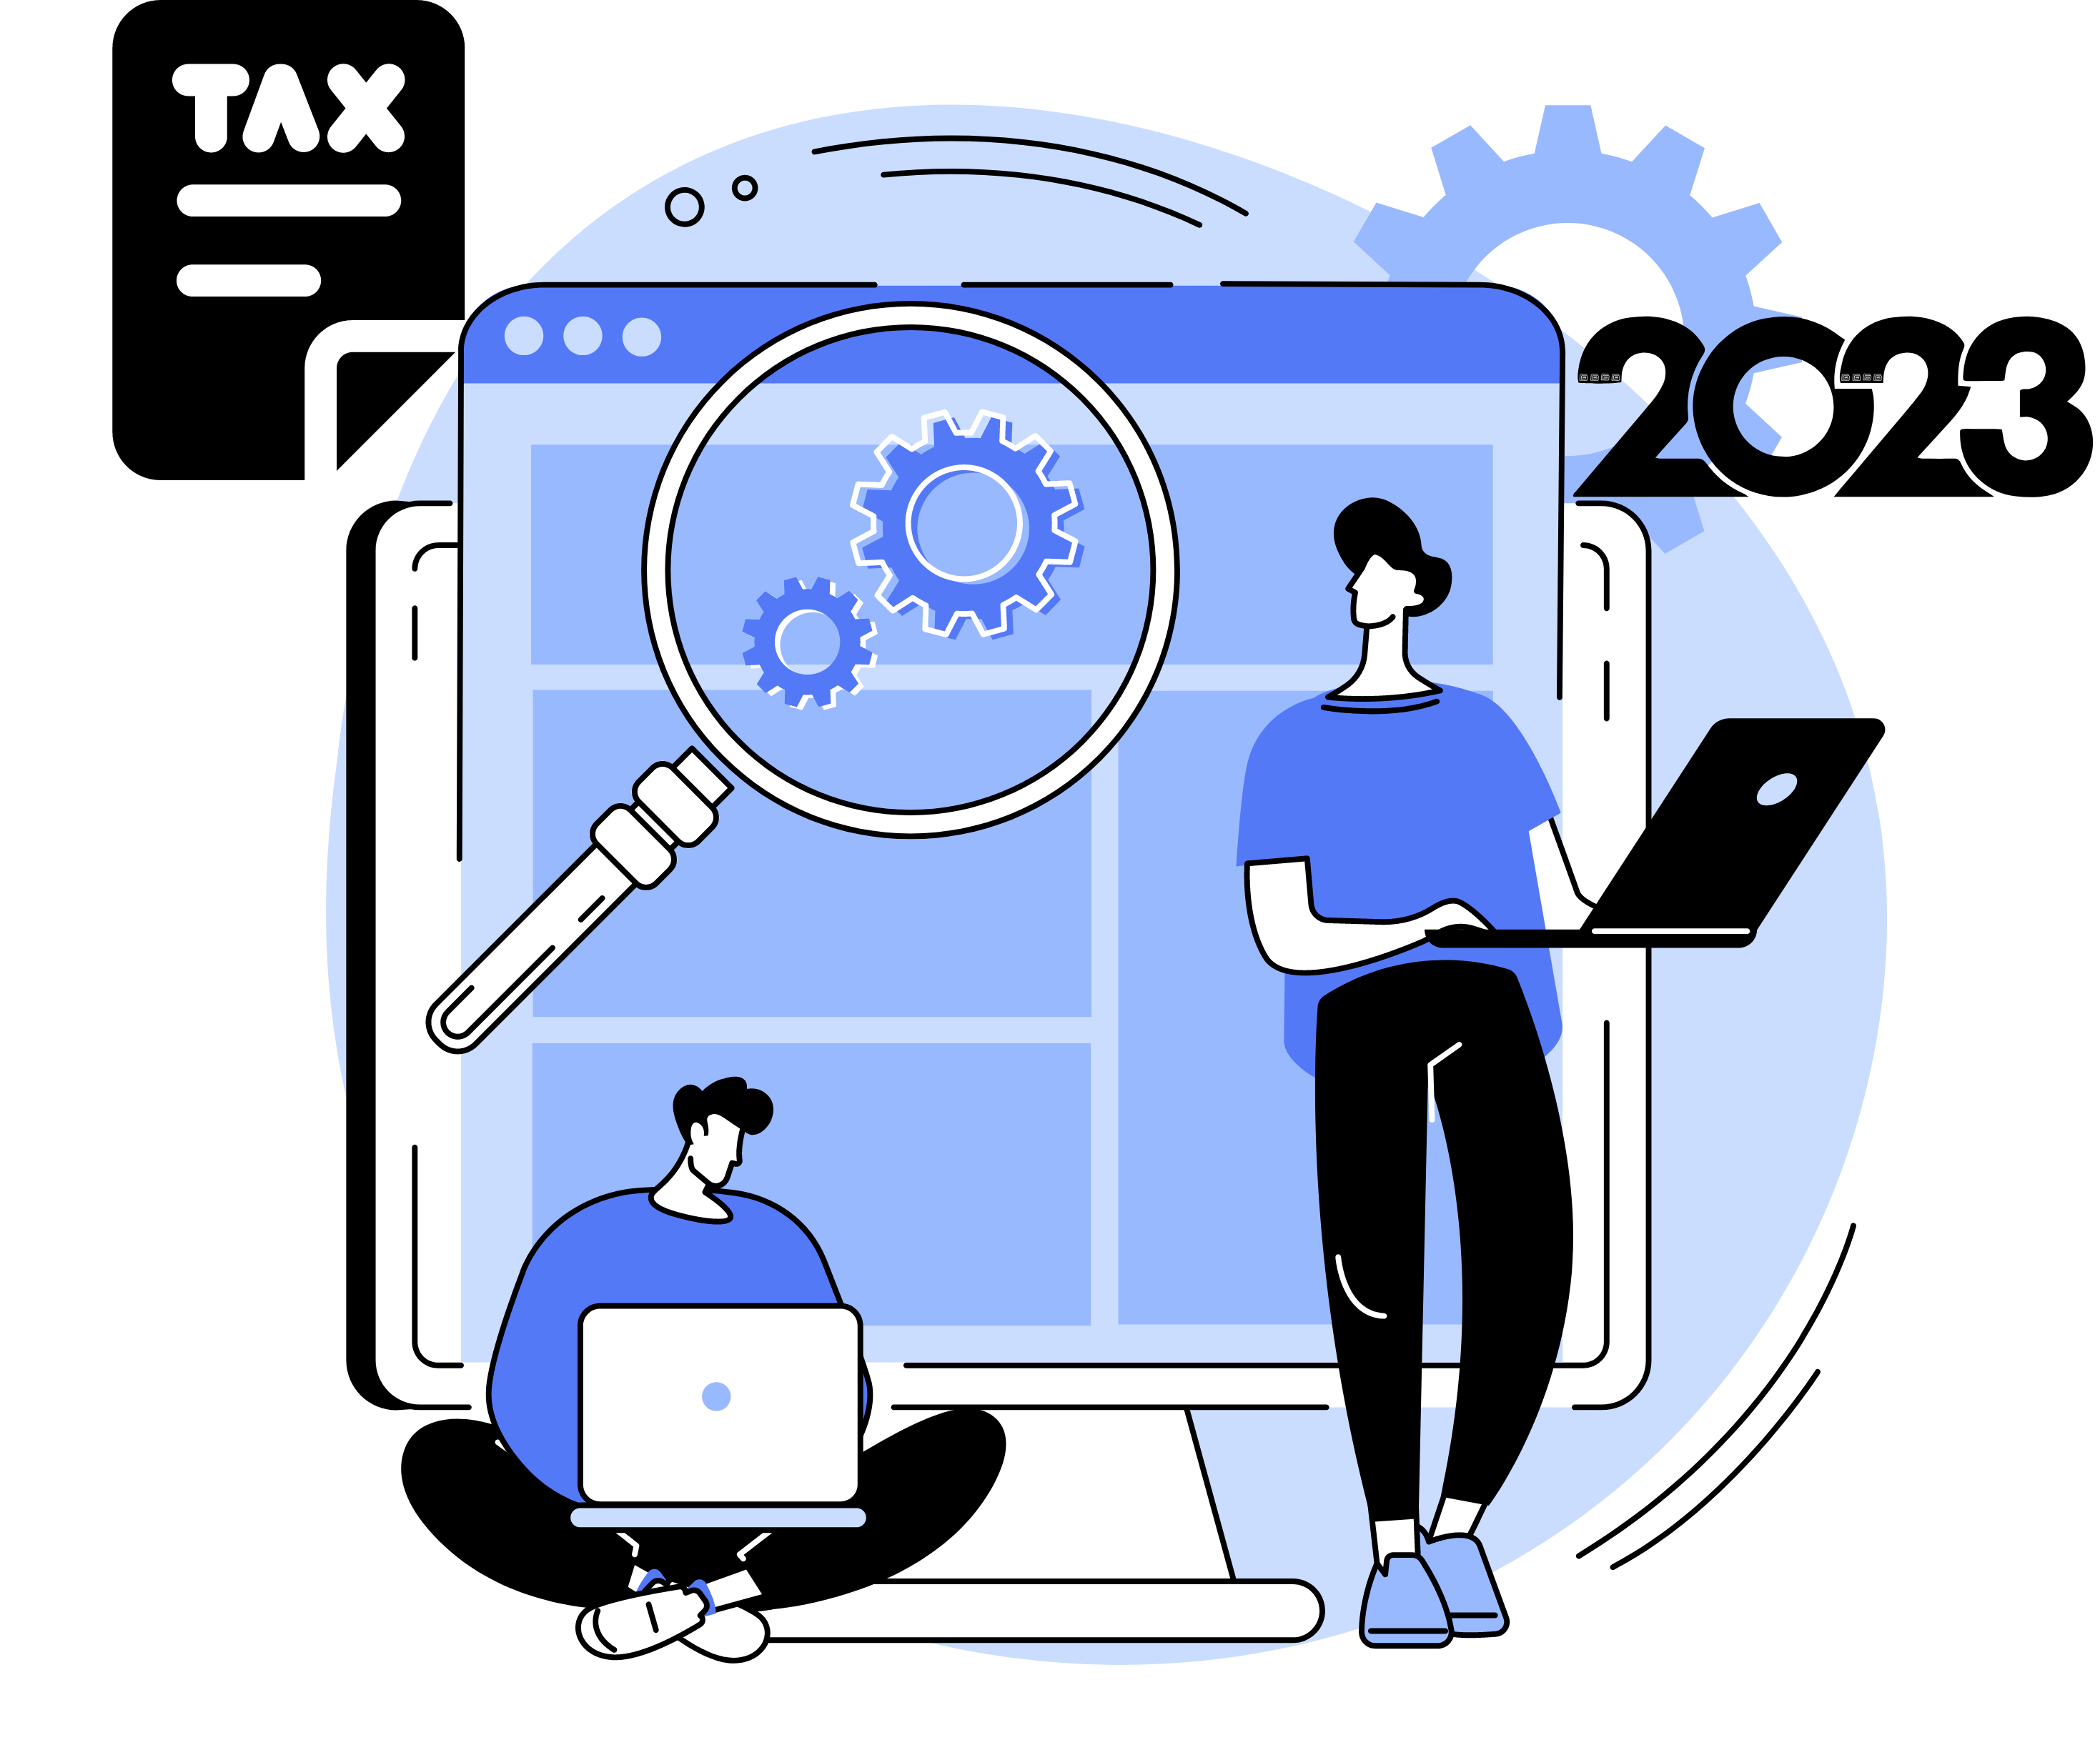 R&D Tax Credits: “Retroactive Changes To Expenses You Need to Know Before Filing Your 2022 Business Taxes”